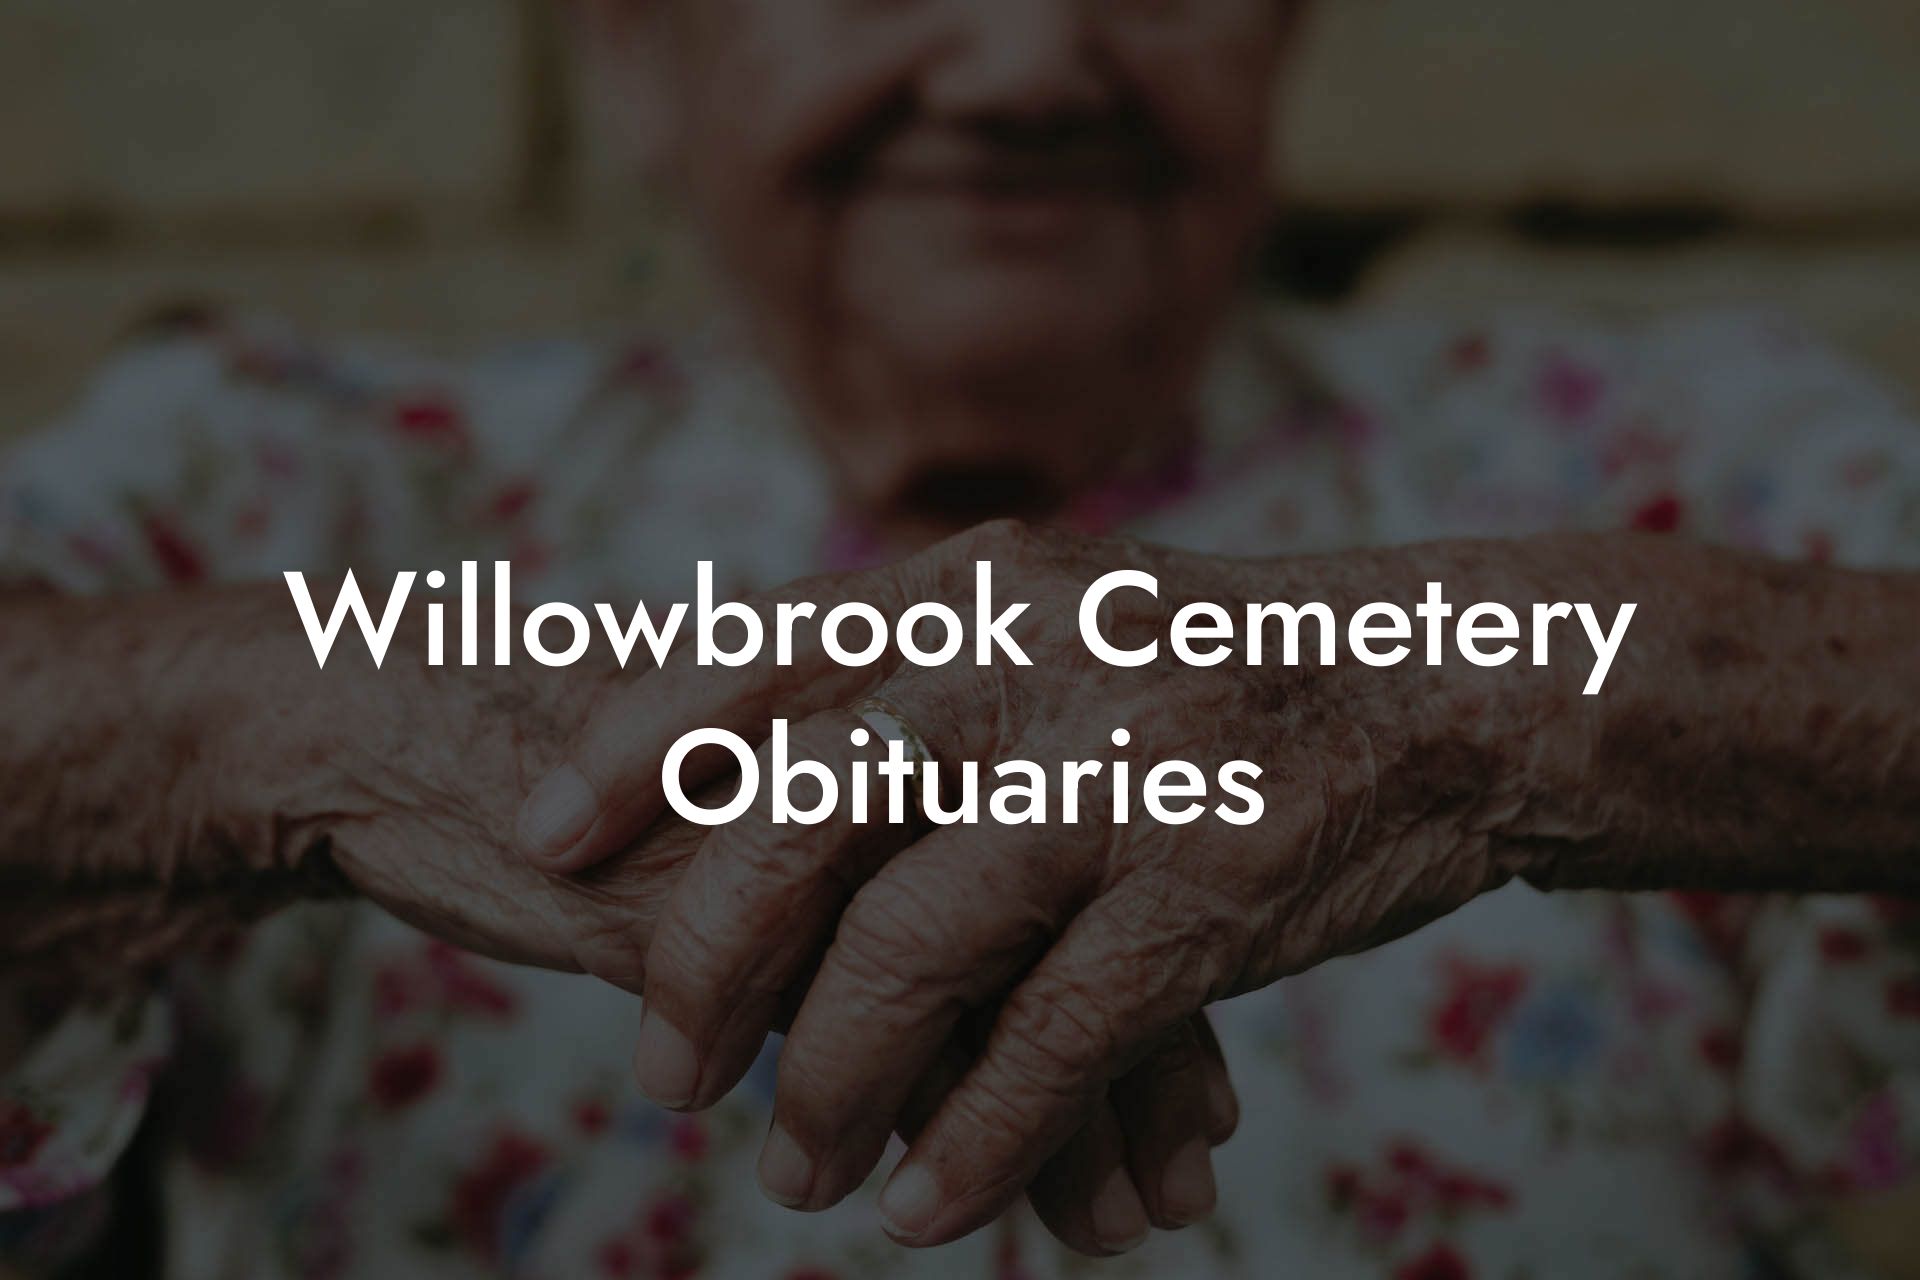 Willowbrook Cemetery Obituaries